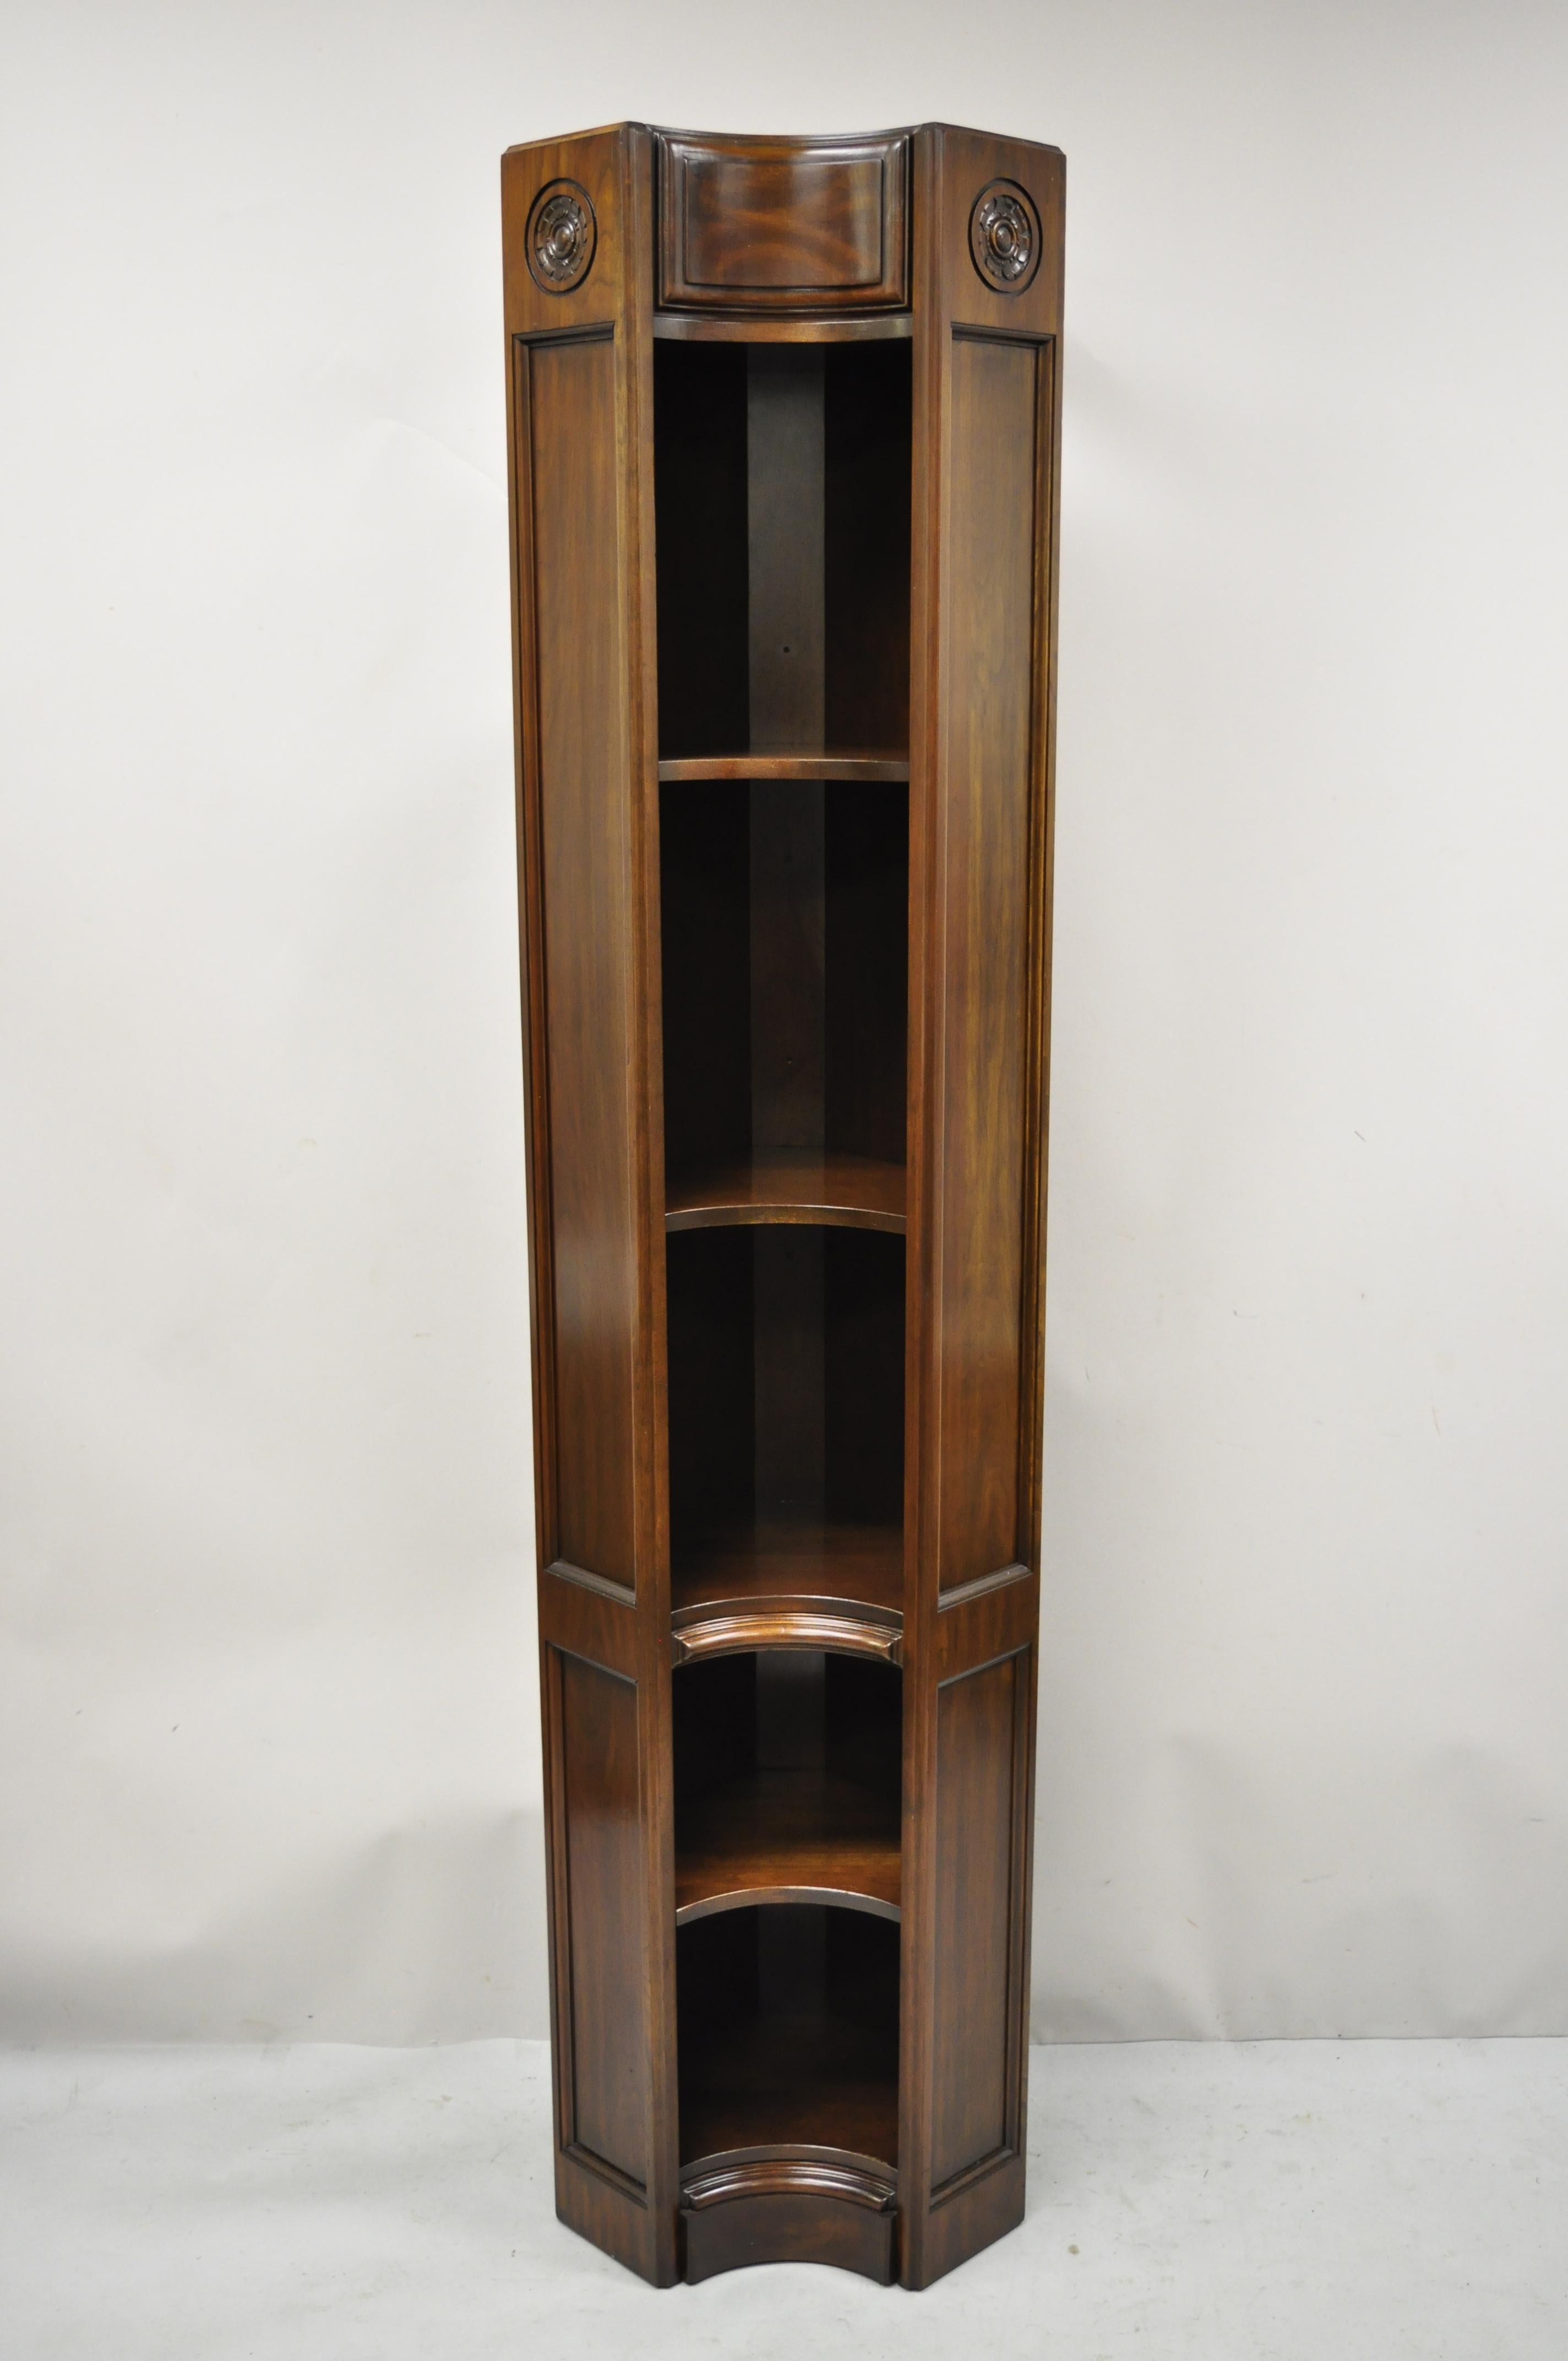 Harden Charleston Collection Tall Cherry Wood Narrow Corner Bookcase - Set of 4. Set includes (4) corner bookcases, tall impressive form, solid cherry wood construction, beautiful wood grain, original stamp, 3 adjustable shelves, very nice vintage